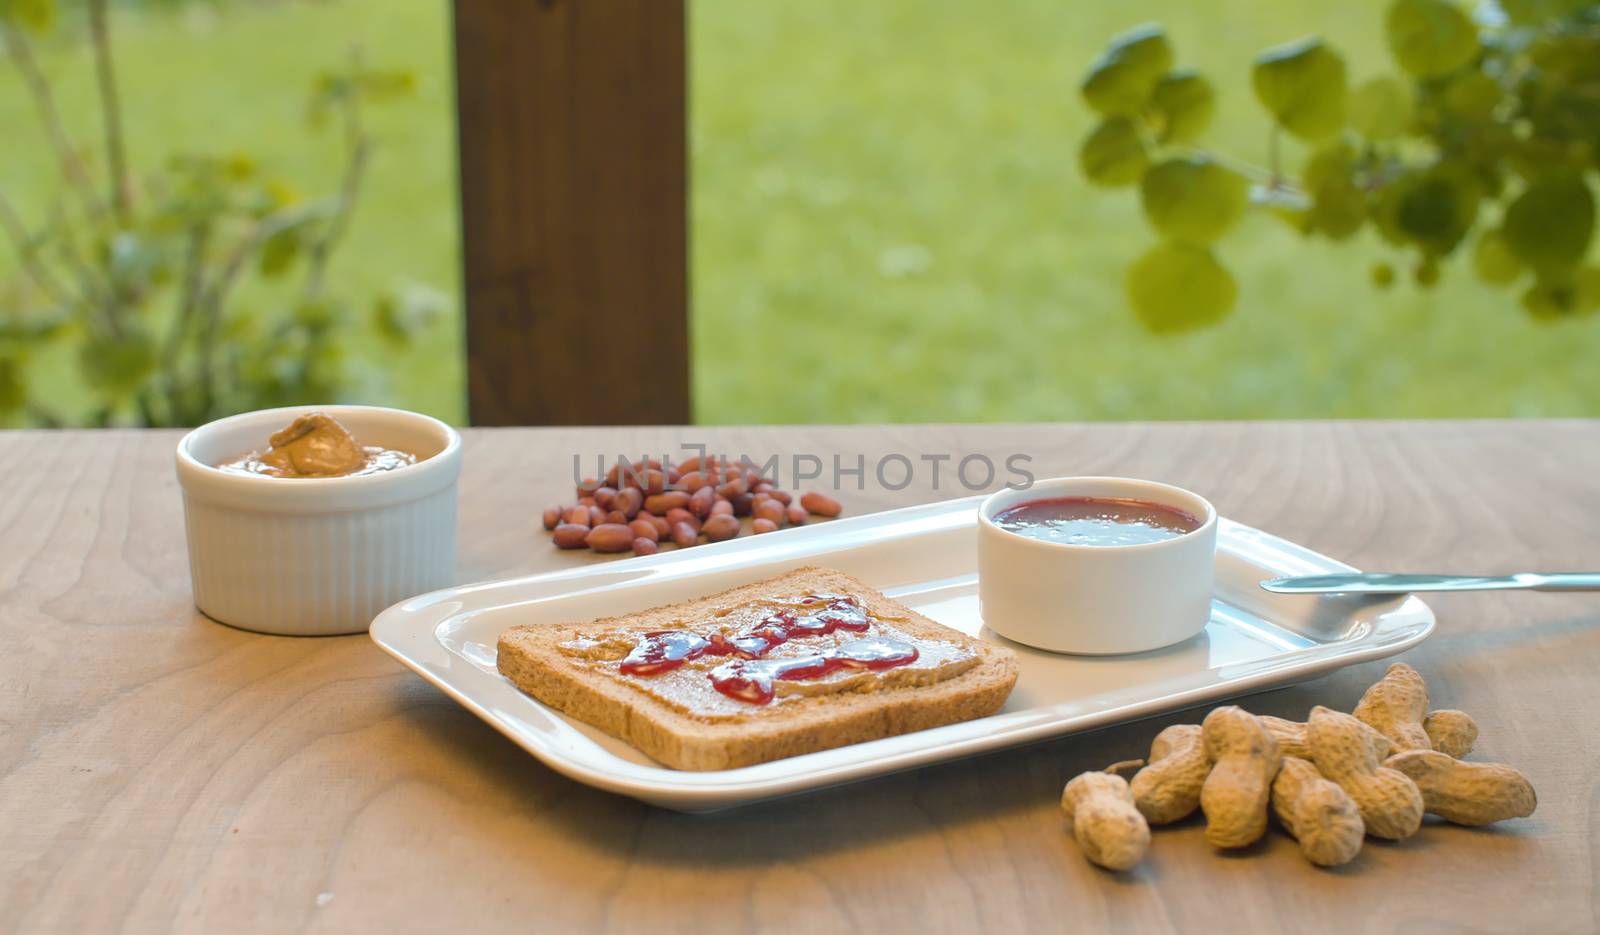 Close up sandwich with peanut butter and jam. Snack in the garden. Vegetarian food. Healthy lifestyle concept.